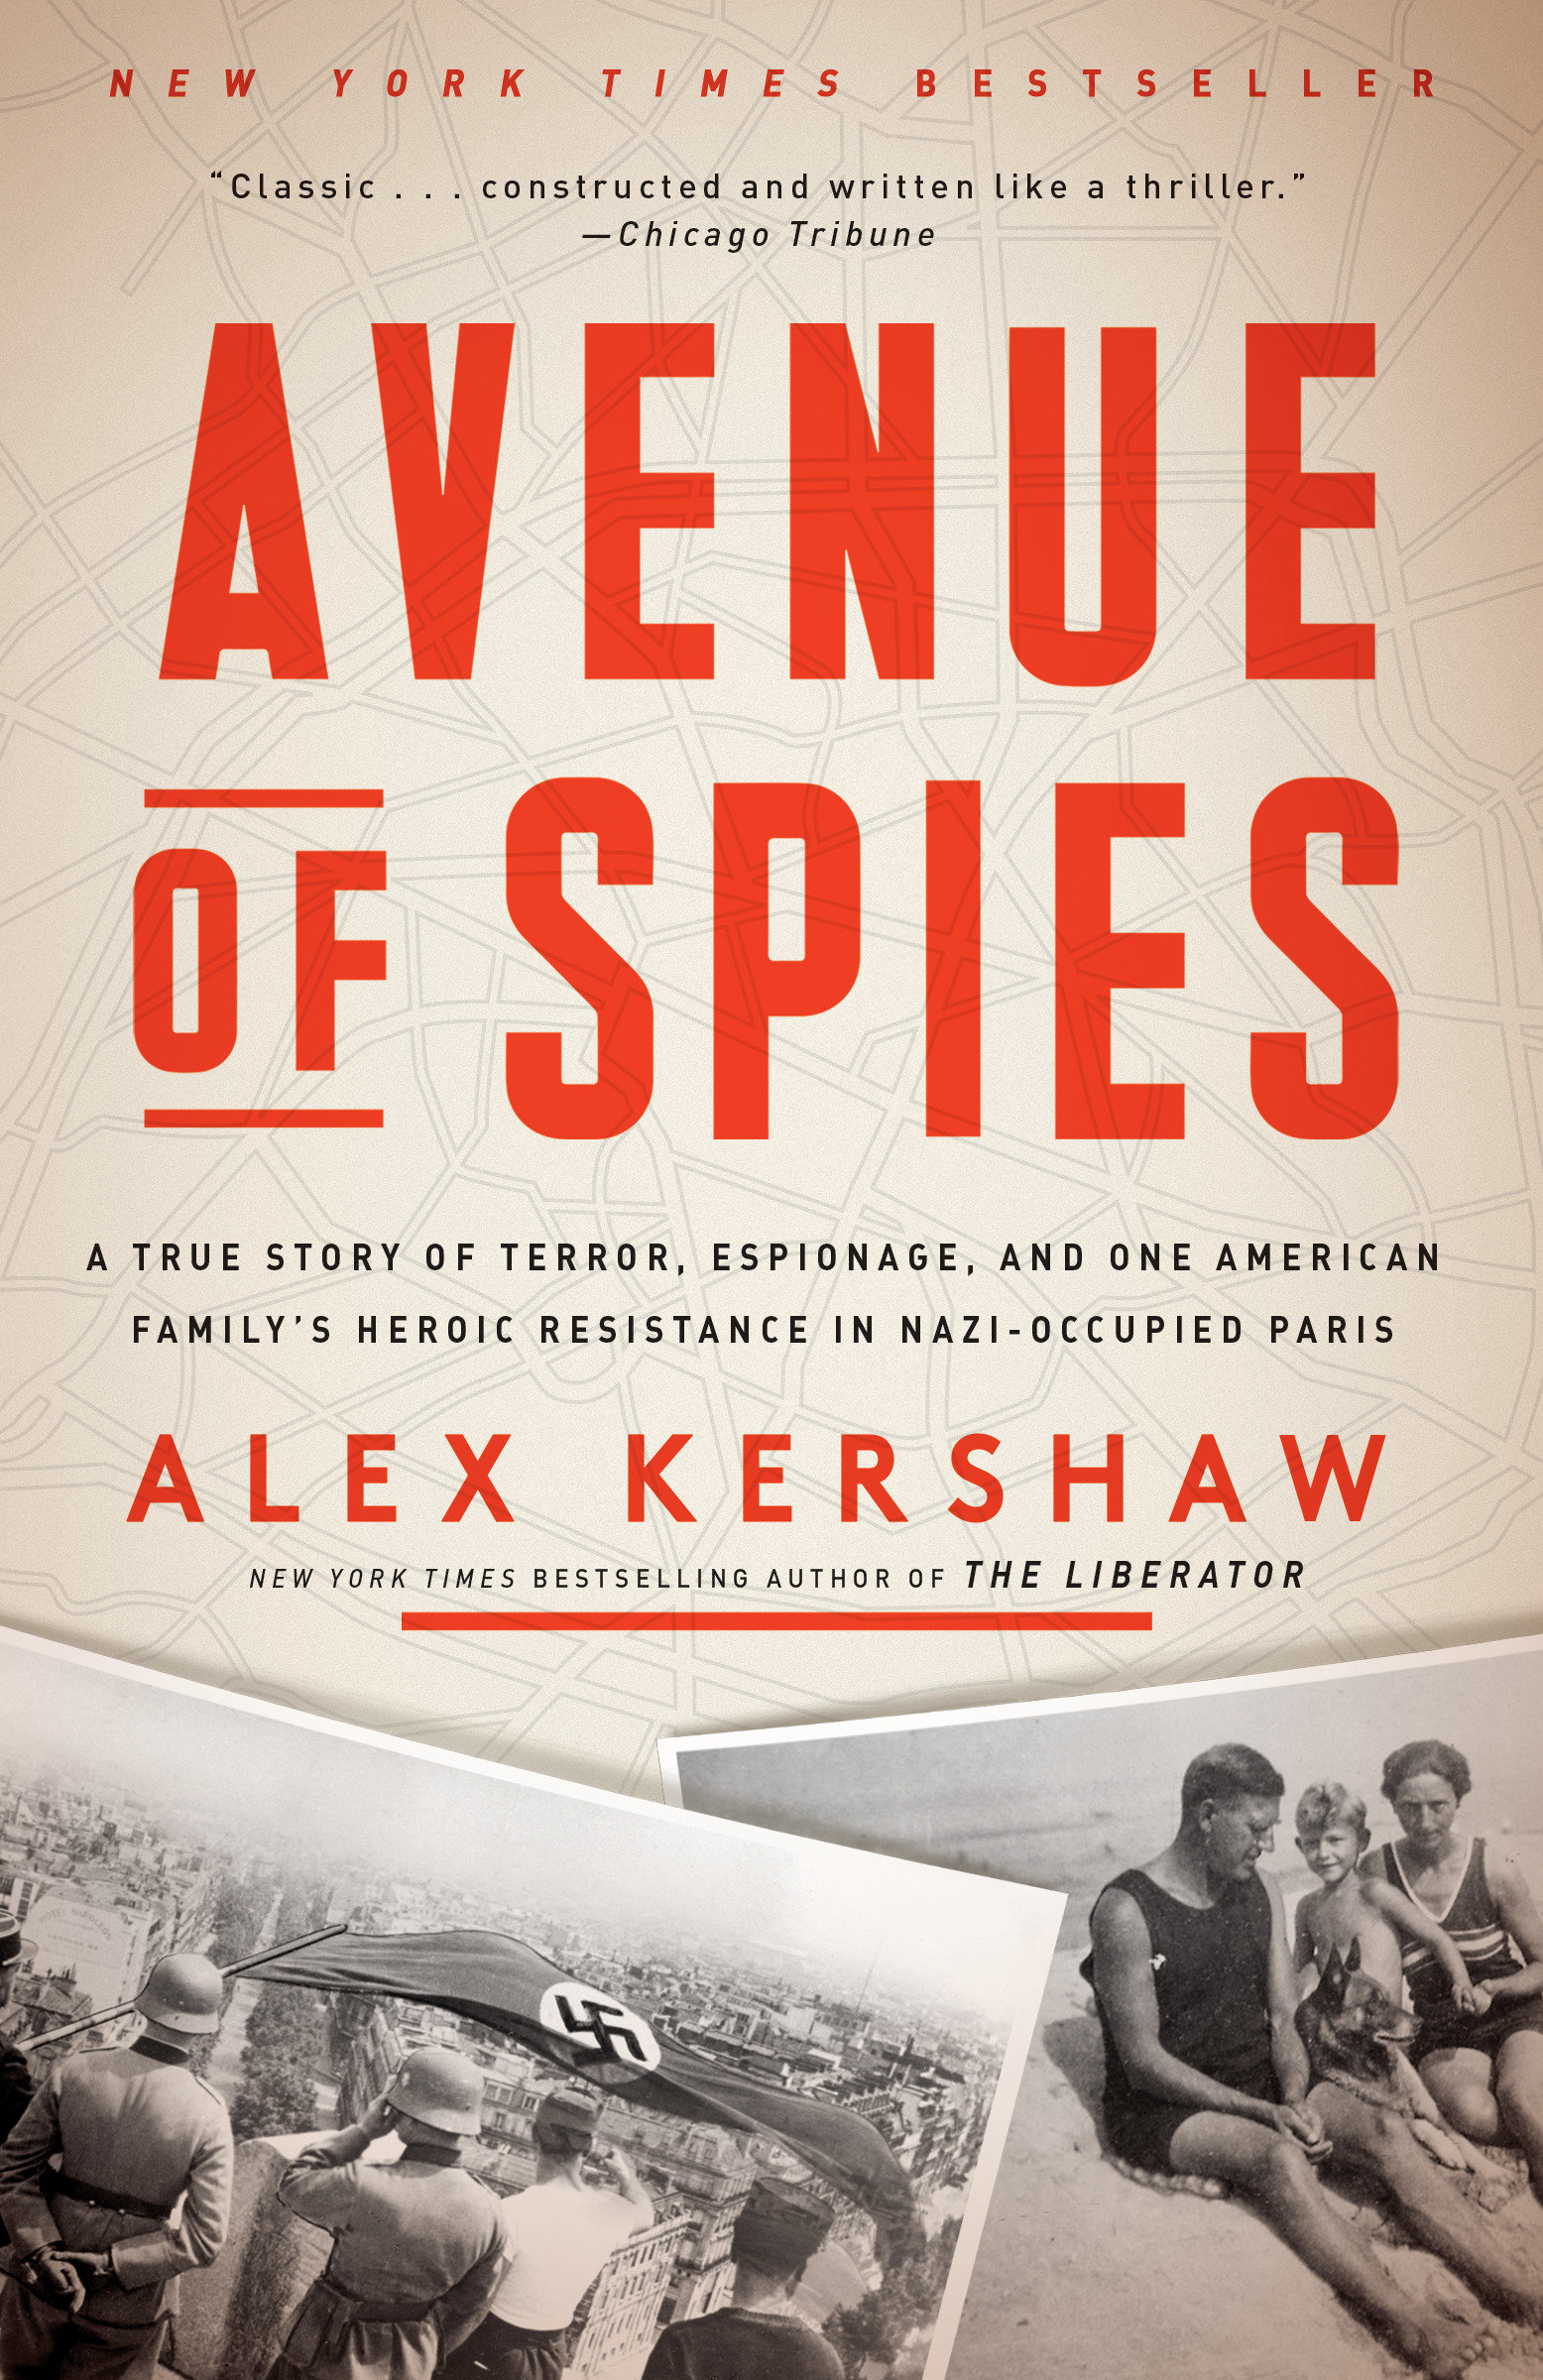 Avenue of spies a true story of terror, espionage, and one American family's heroic resistance in Nazi-occupied France cover image